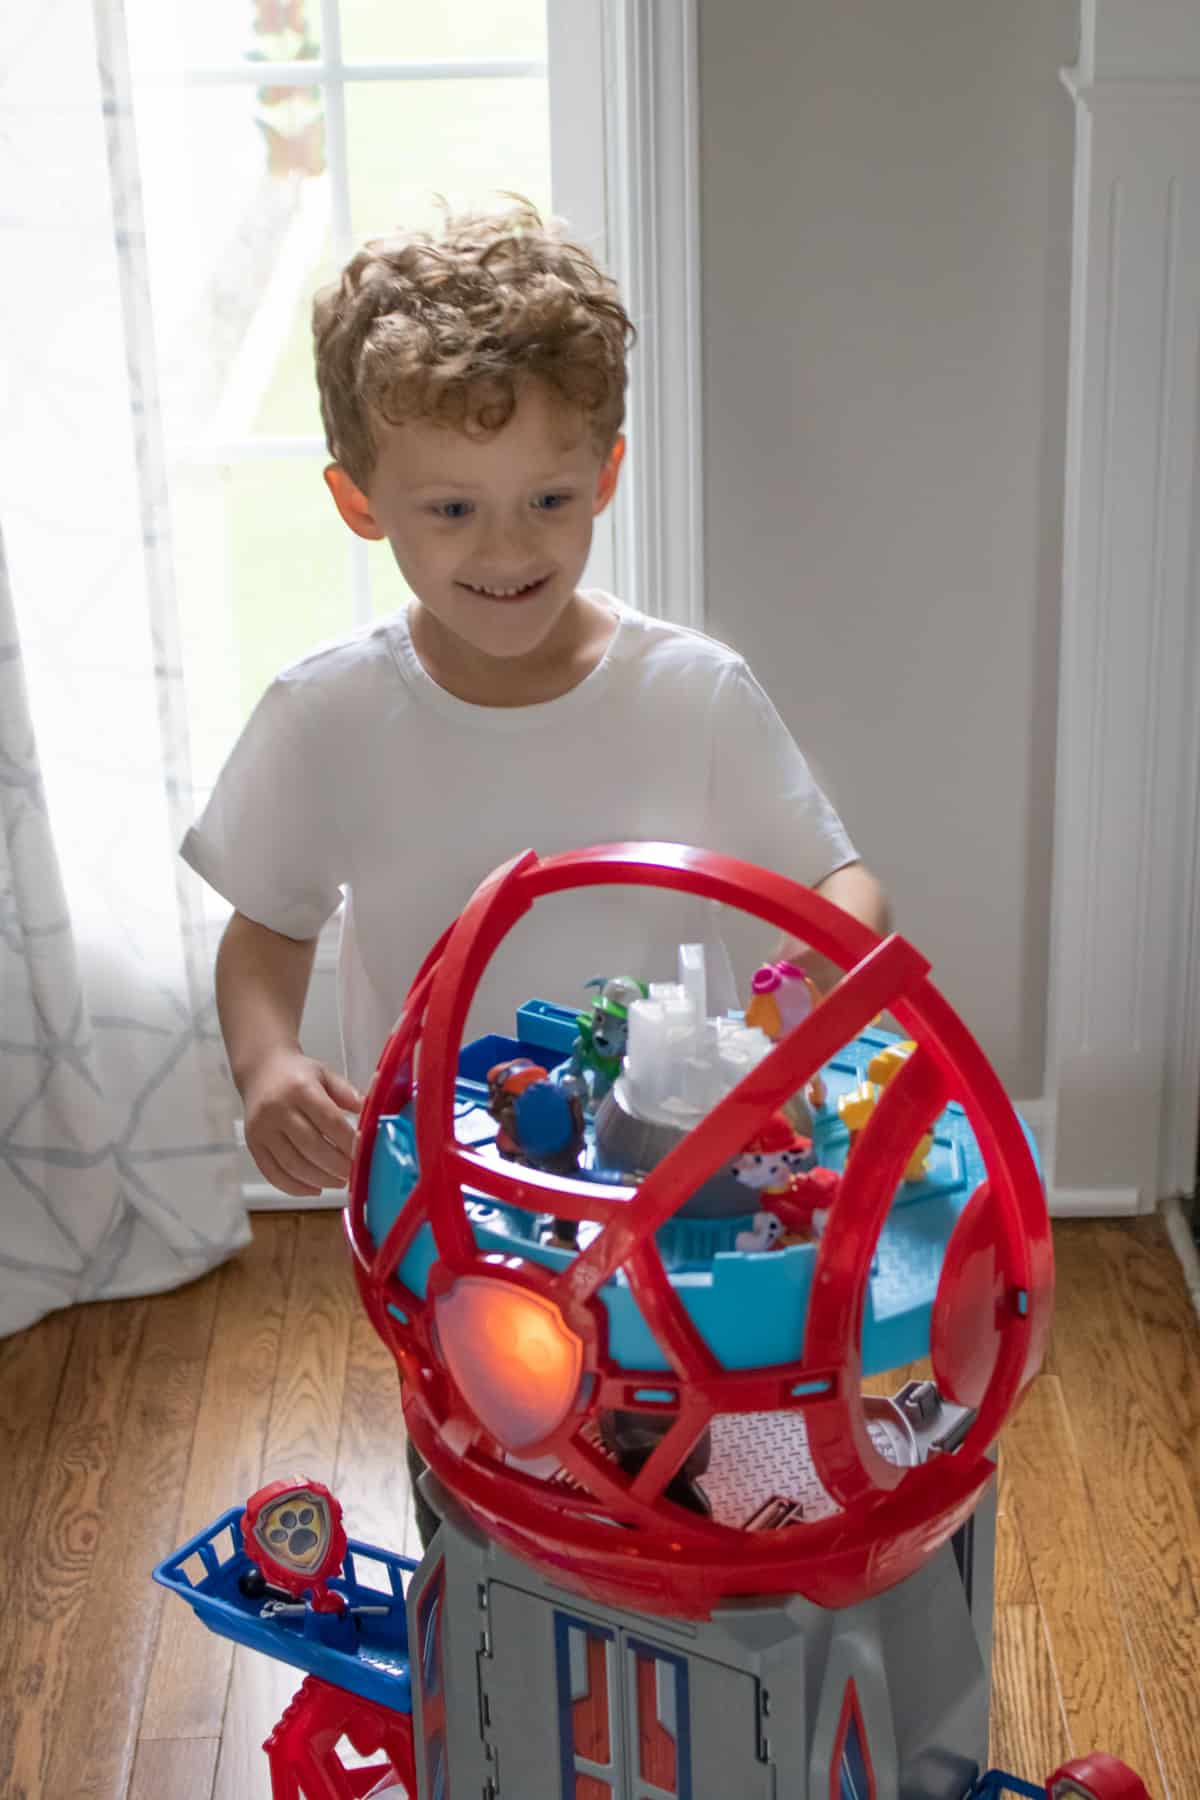 Boy smiling and playing with PAW Patrol tower playset